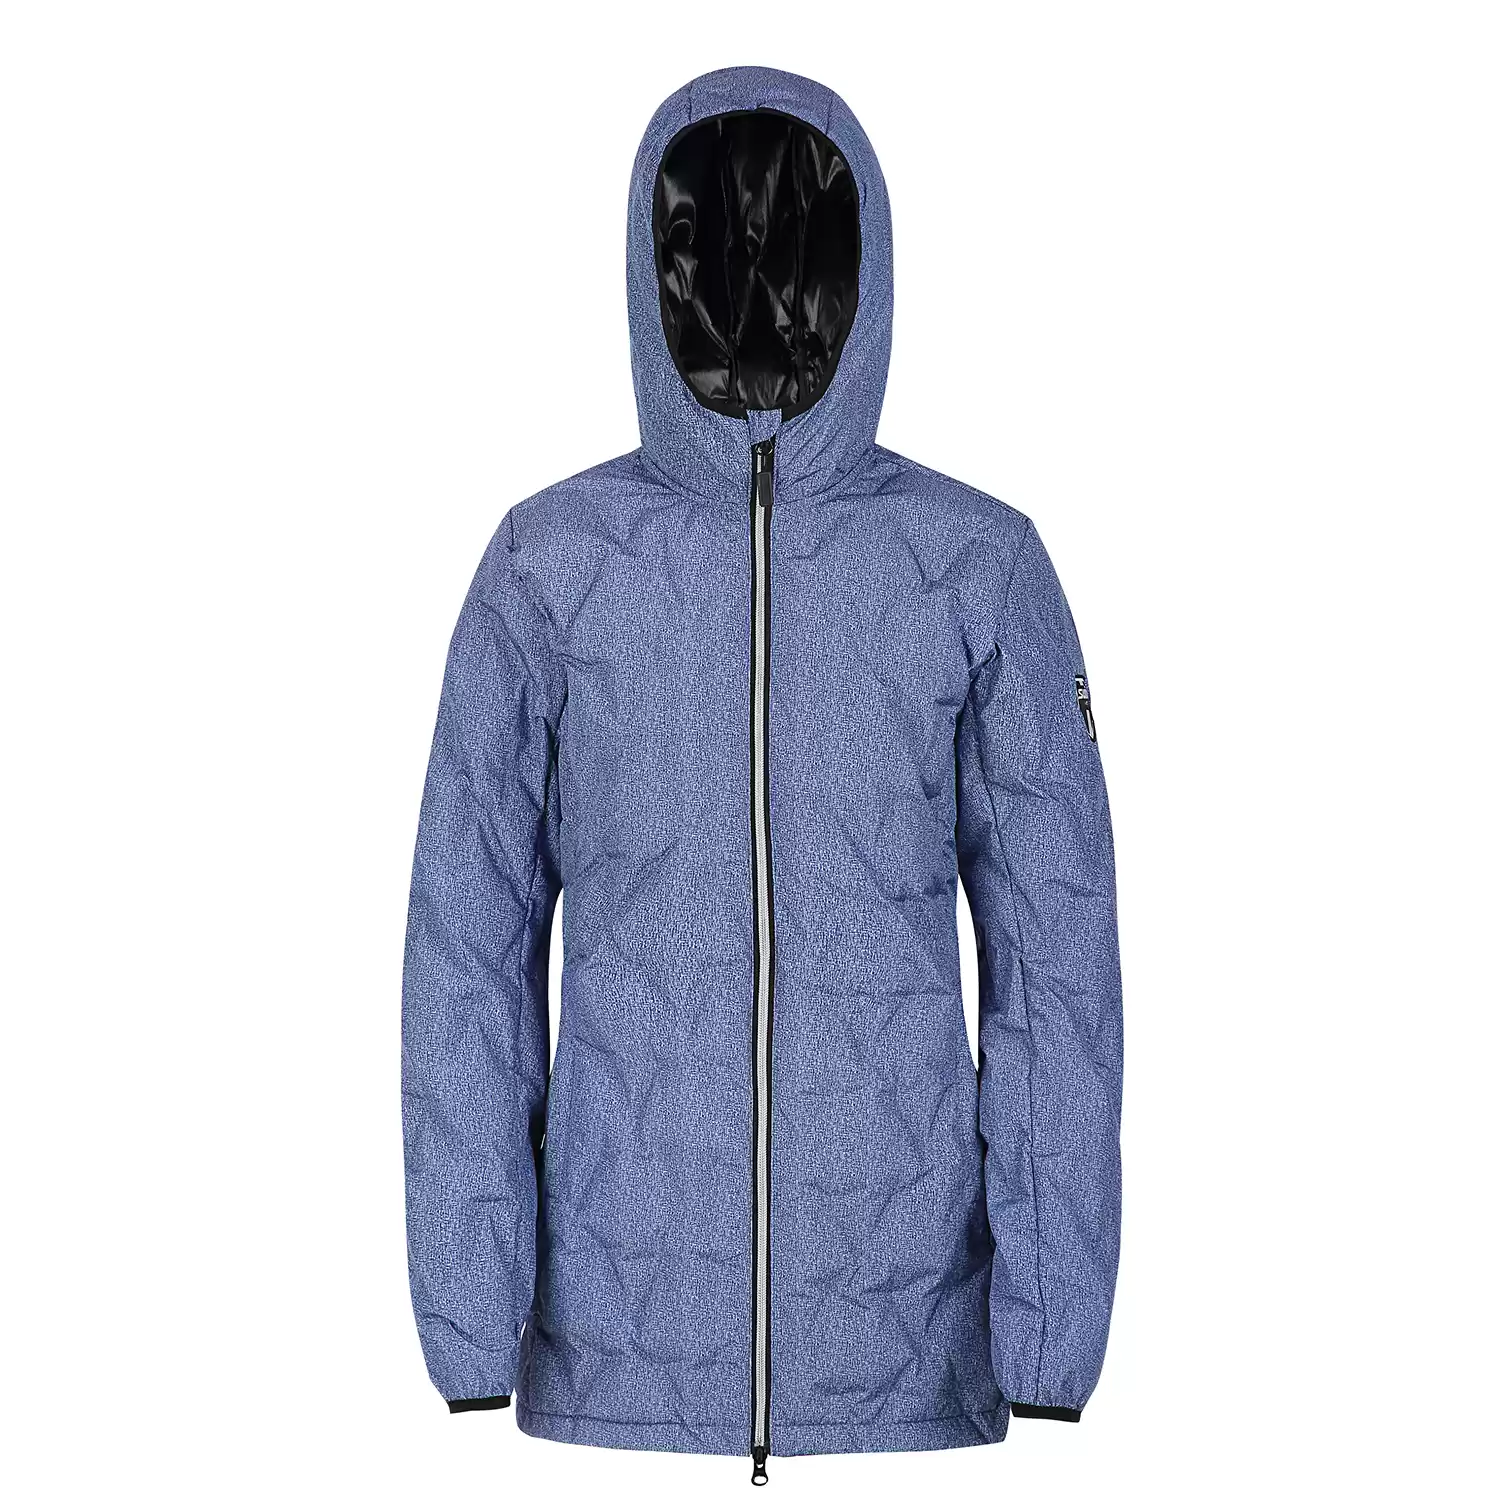 Ladies down jacket with hot fused technology